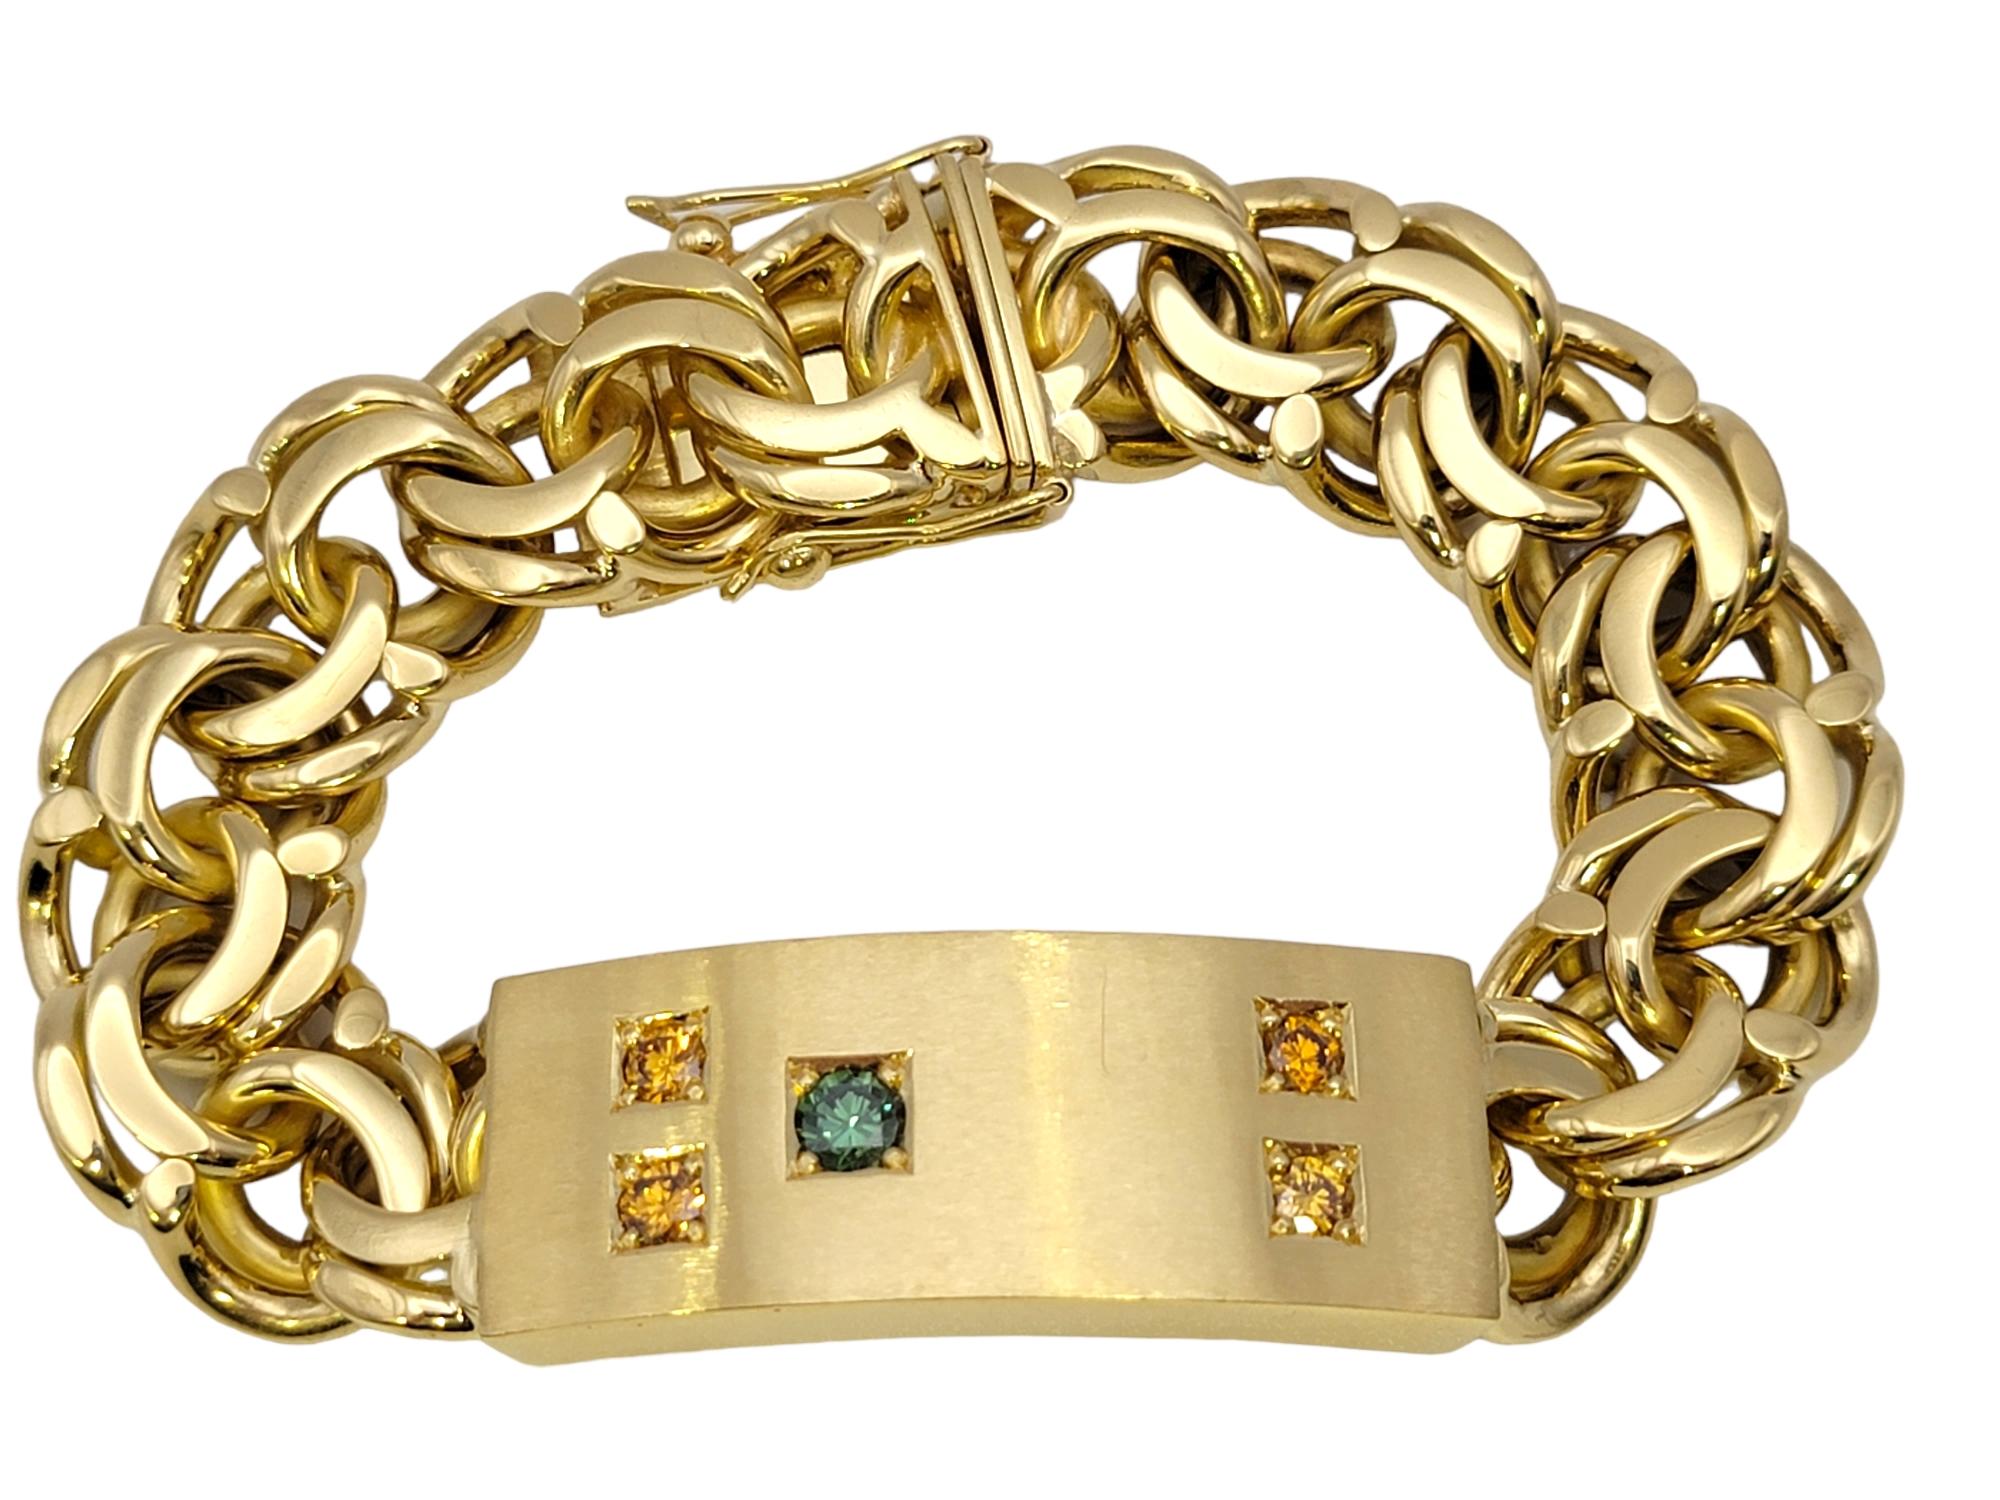 This eye-catching men's 18 karat yellow gold and colored diamond ID link bracelet makes a bold and luxurious statement. The contemporary design of this impressive piece looks handsome on the wrist, really drawing the viewers attention to the rich